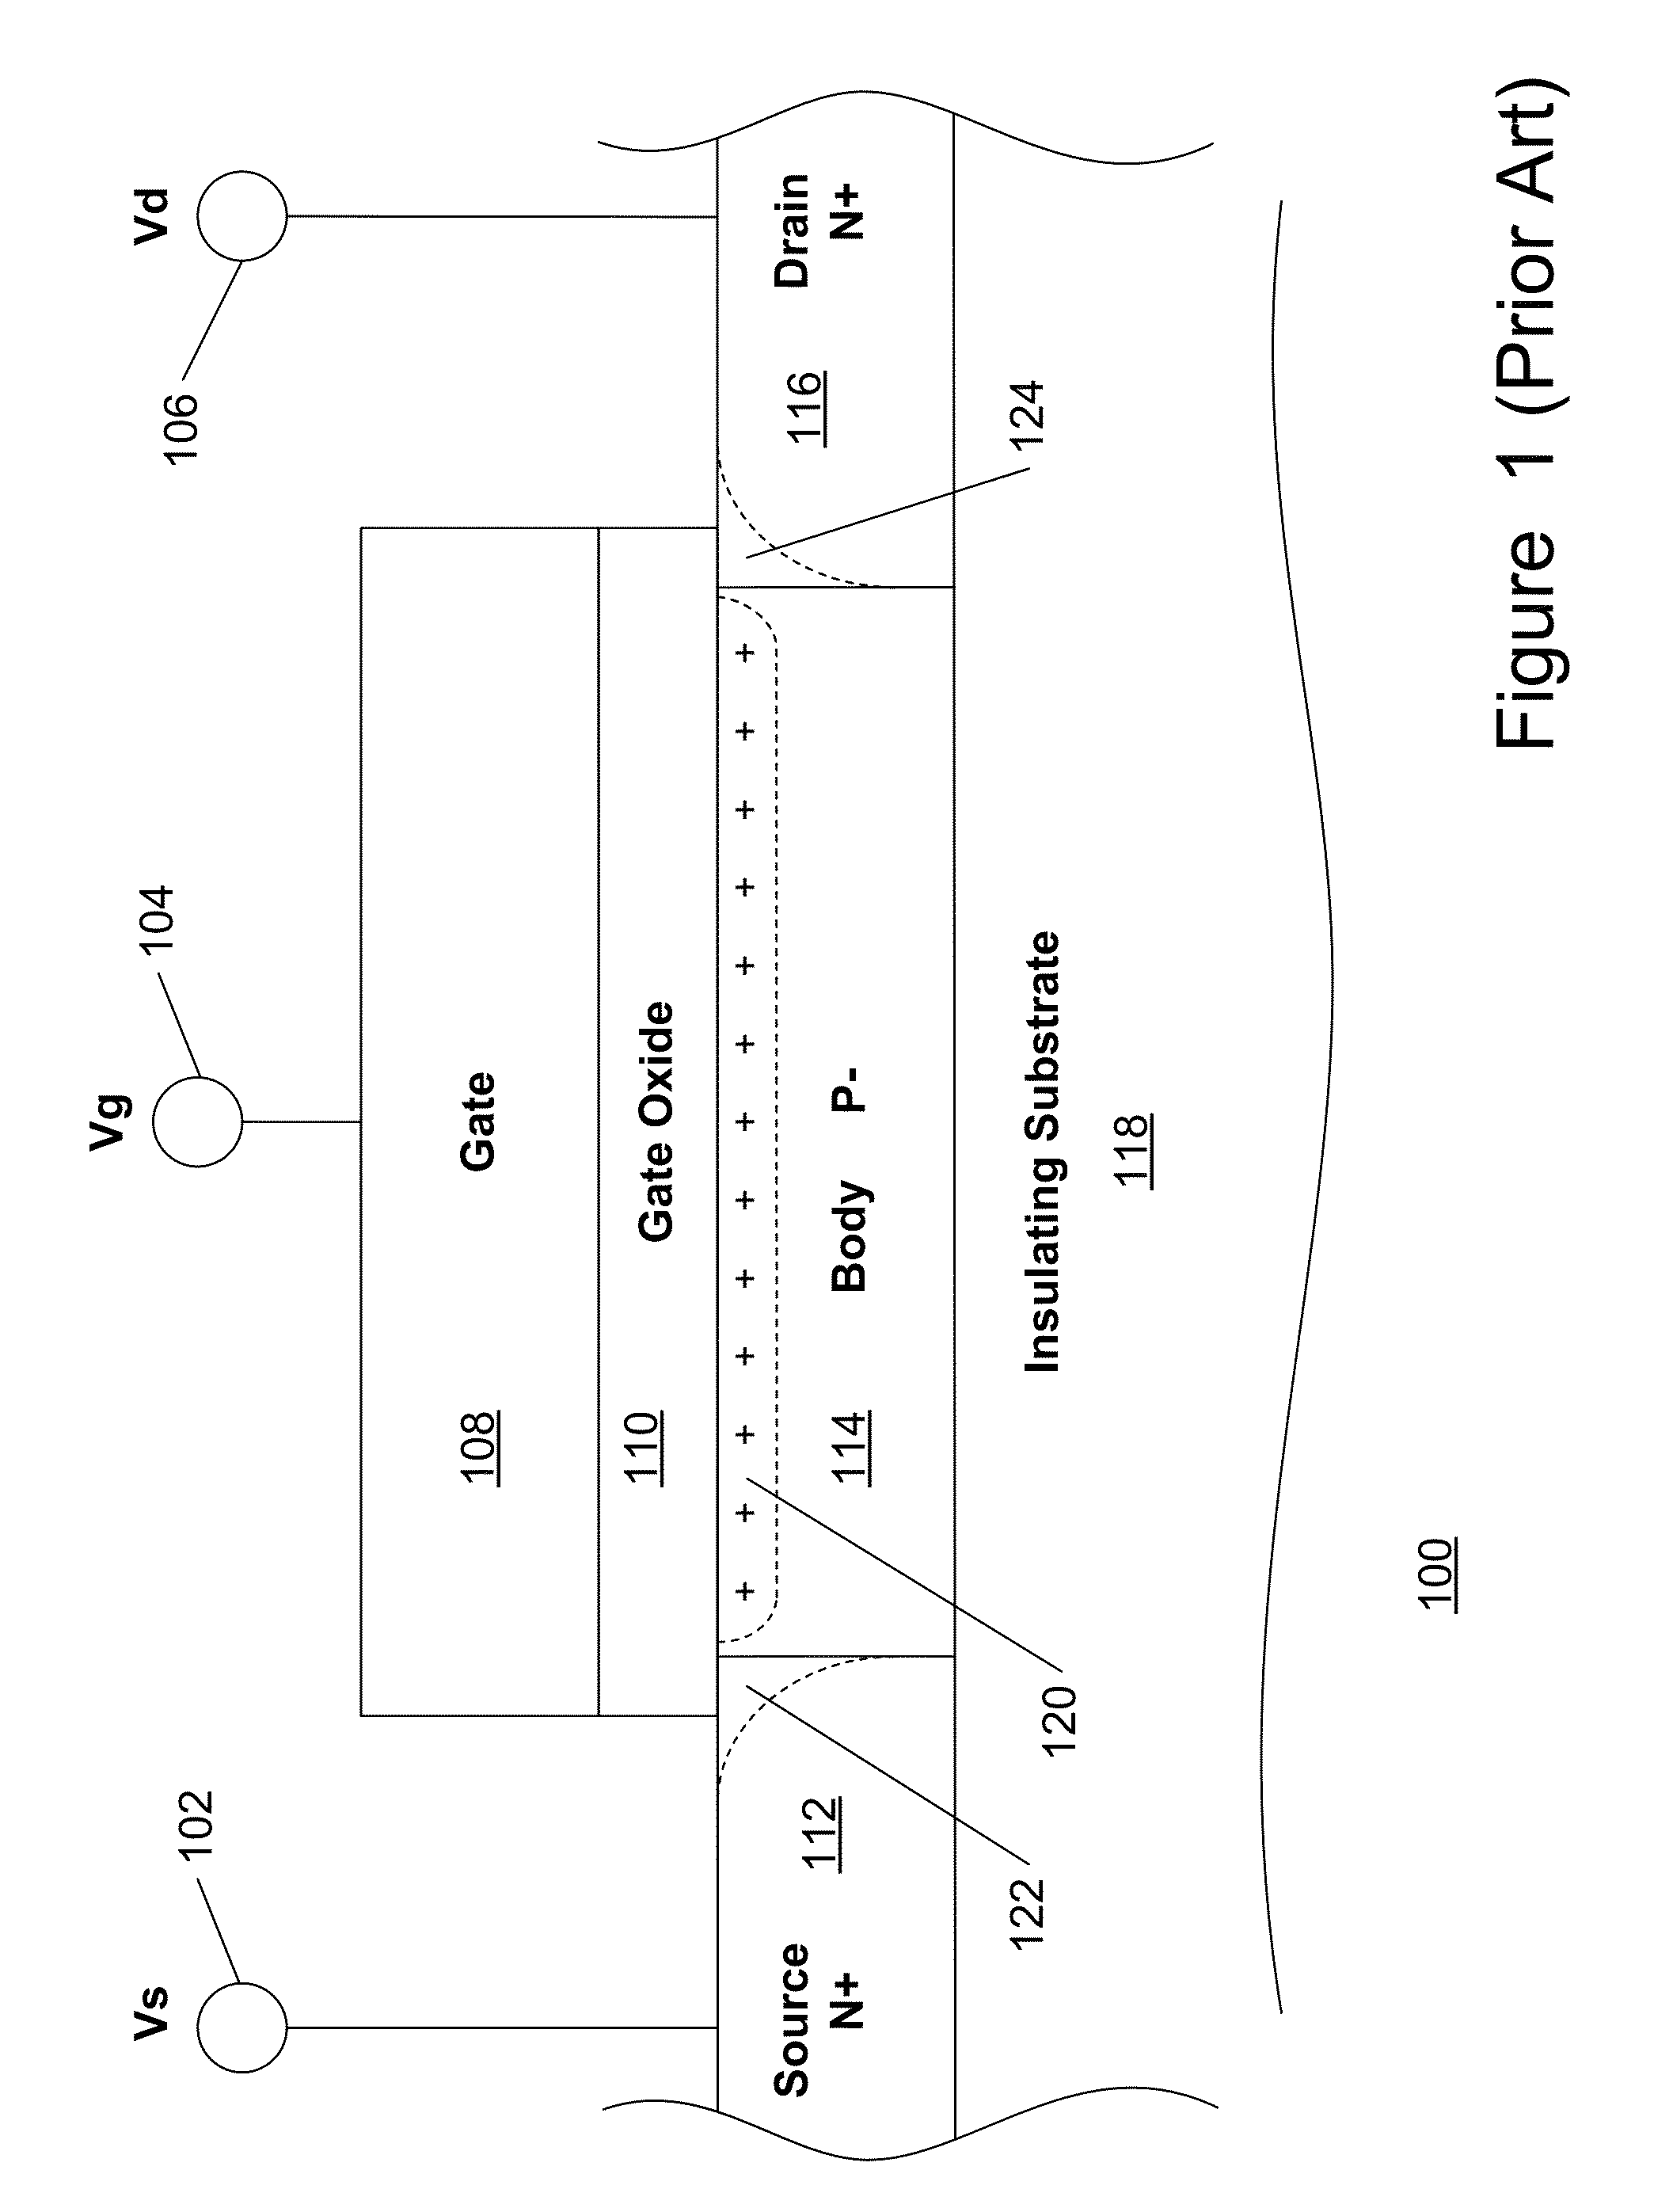 Method and Apparatus for use in Improving Linearity of MOSFETs Using an Accumulated Charge Sink-Harmonic Wrinkle Reduction